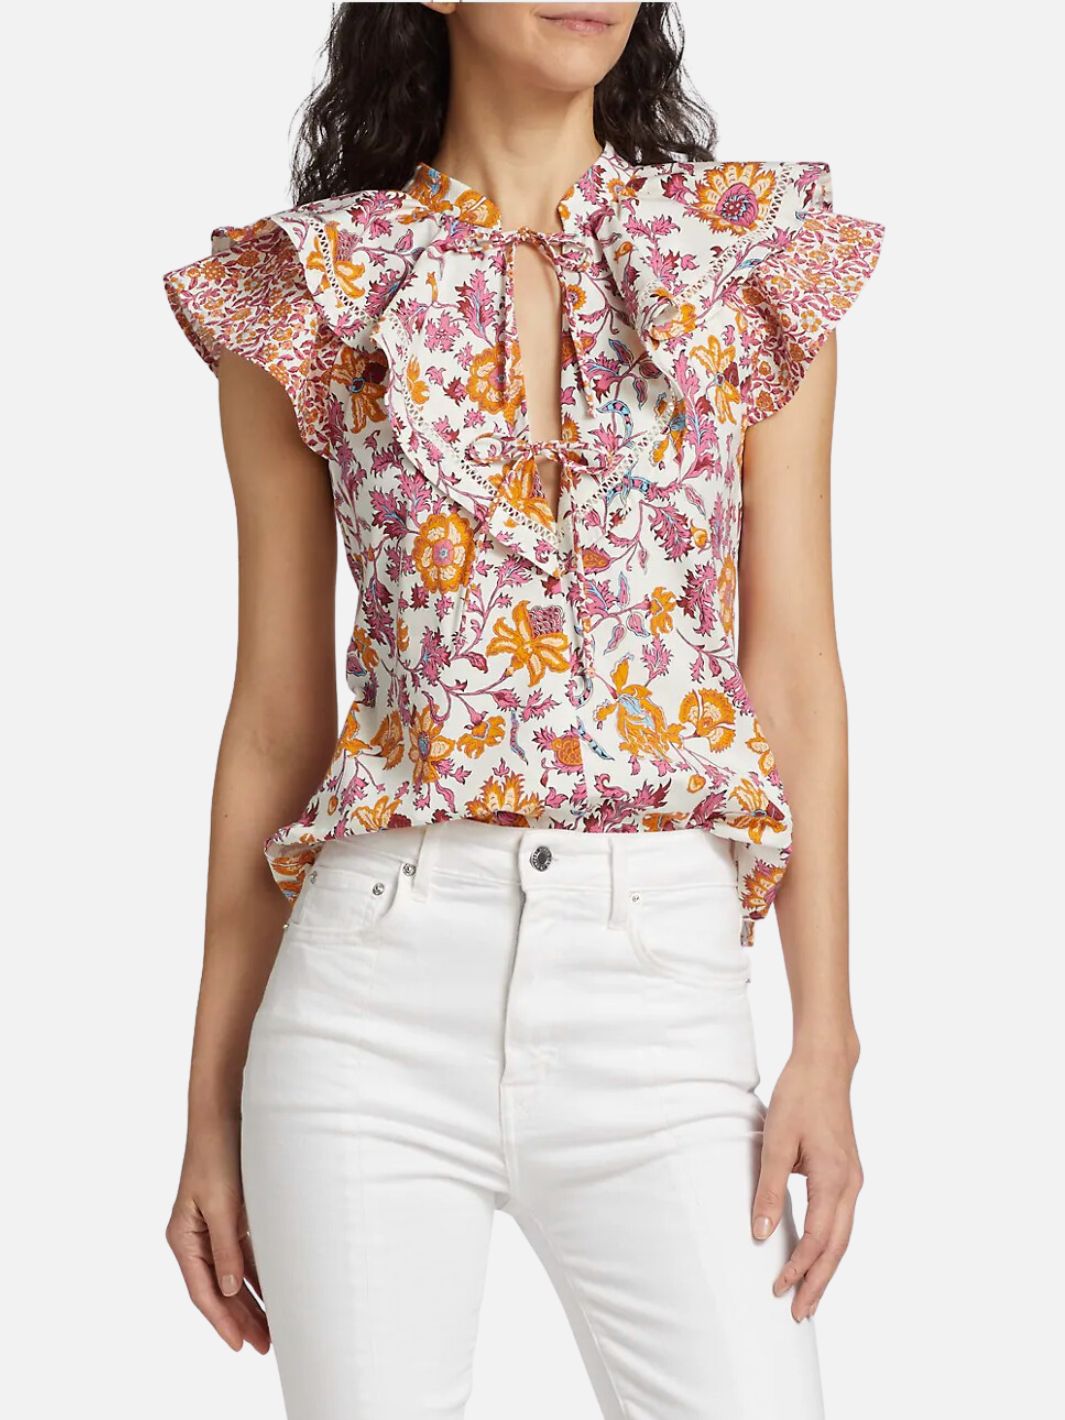 NAJAH FLORAL COTTON TOP IN MARIGOLD LILAC - Romi Boutique